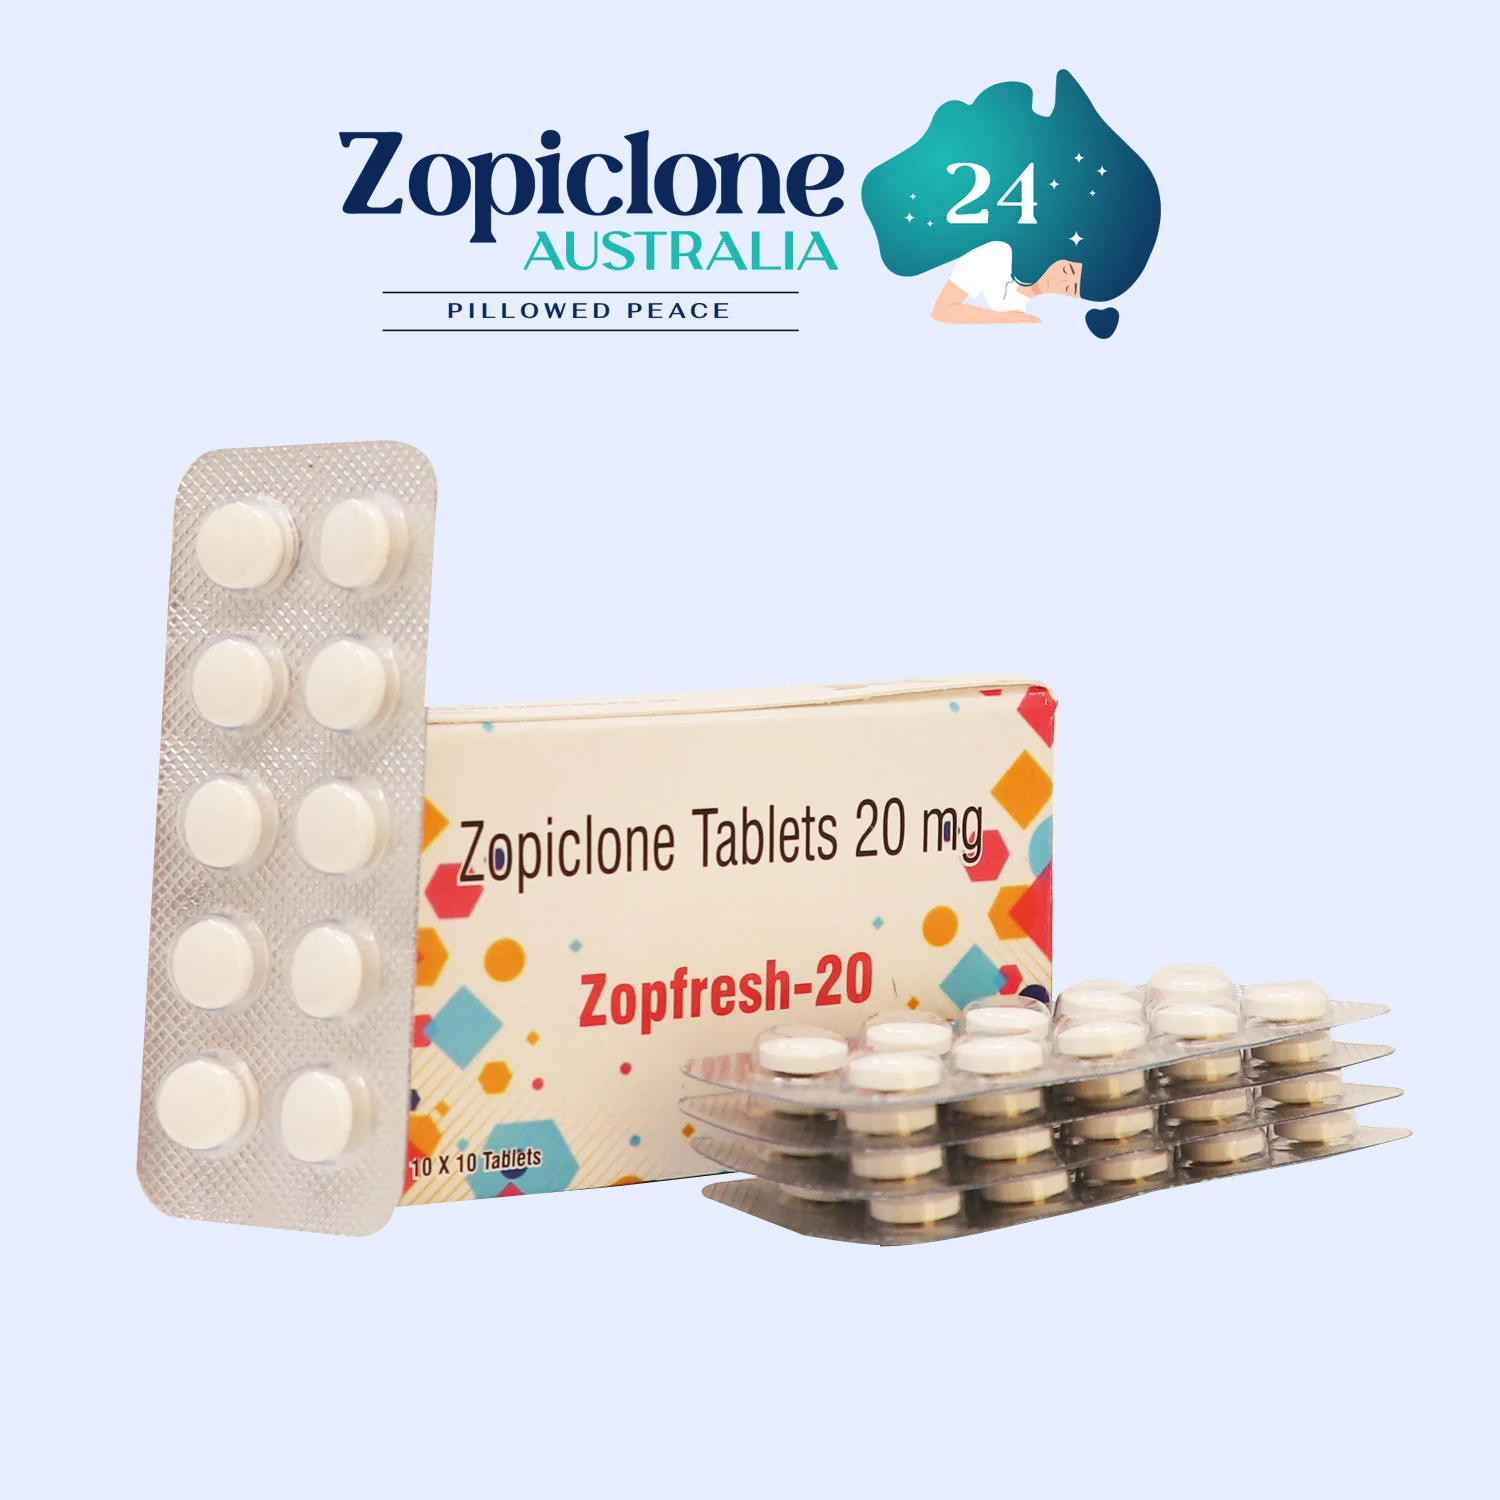 Zopiclone Tablets 20 mg